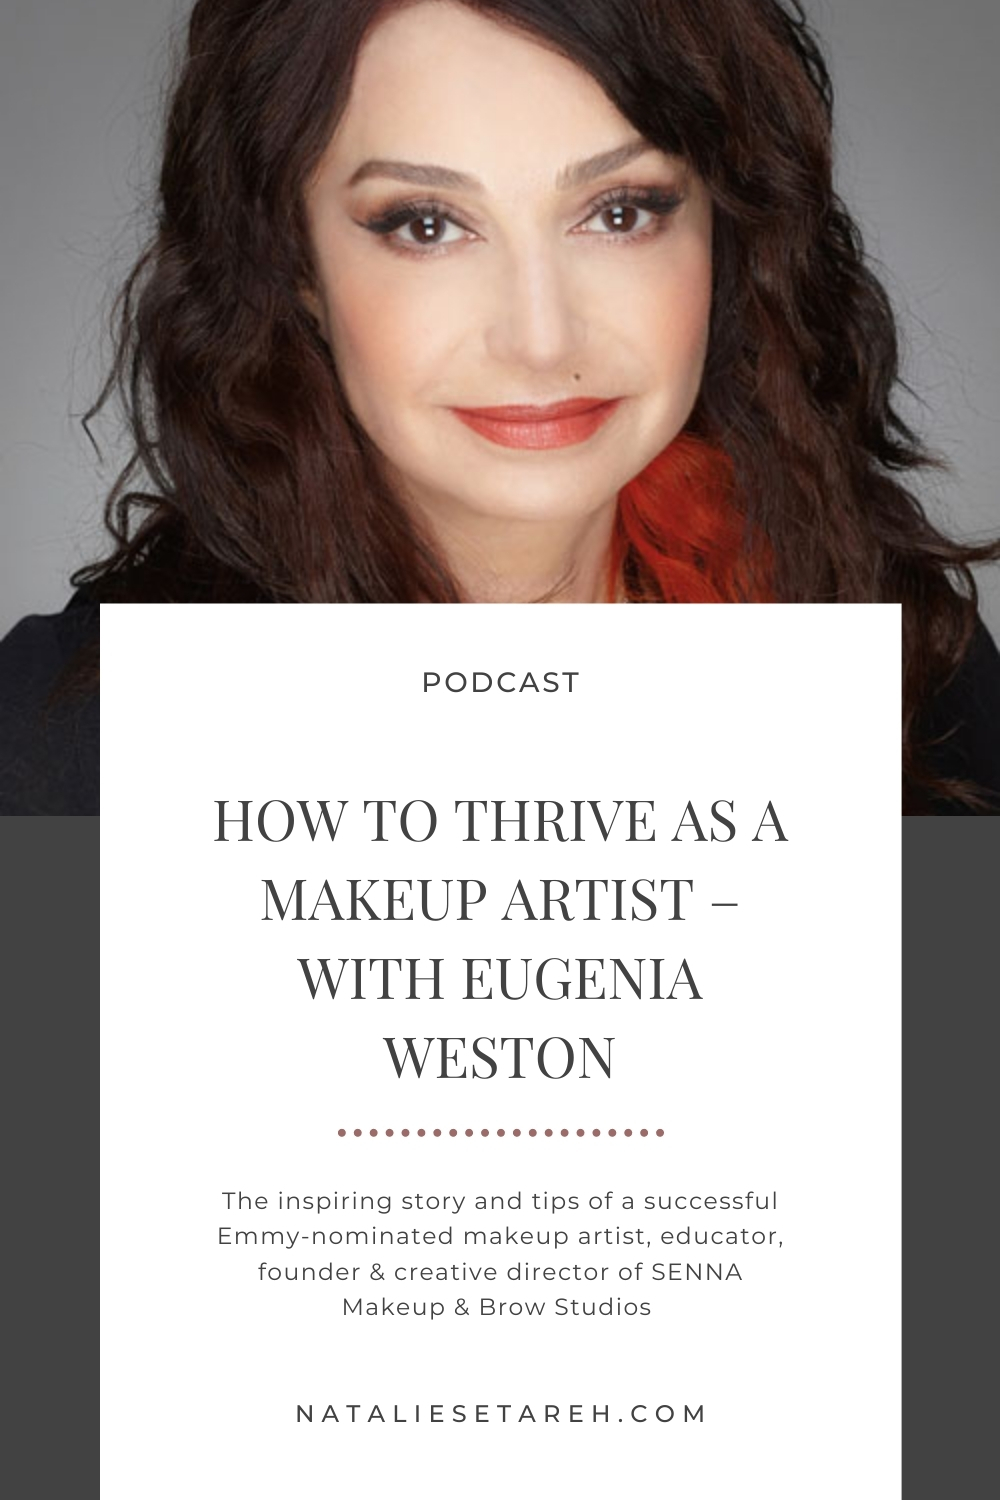 How to thrive as a makeup artist with Eugenia Weston